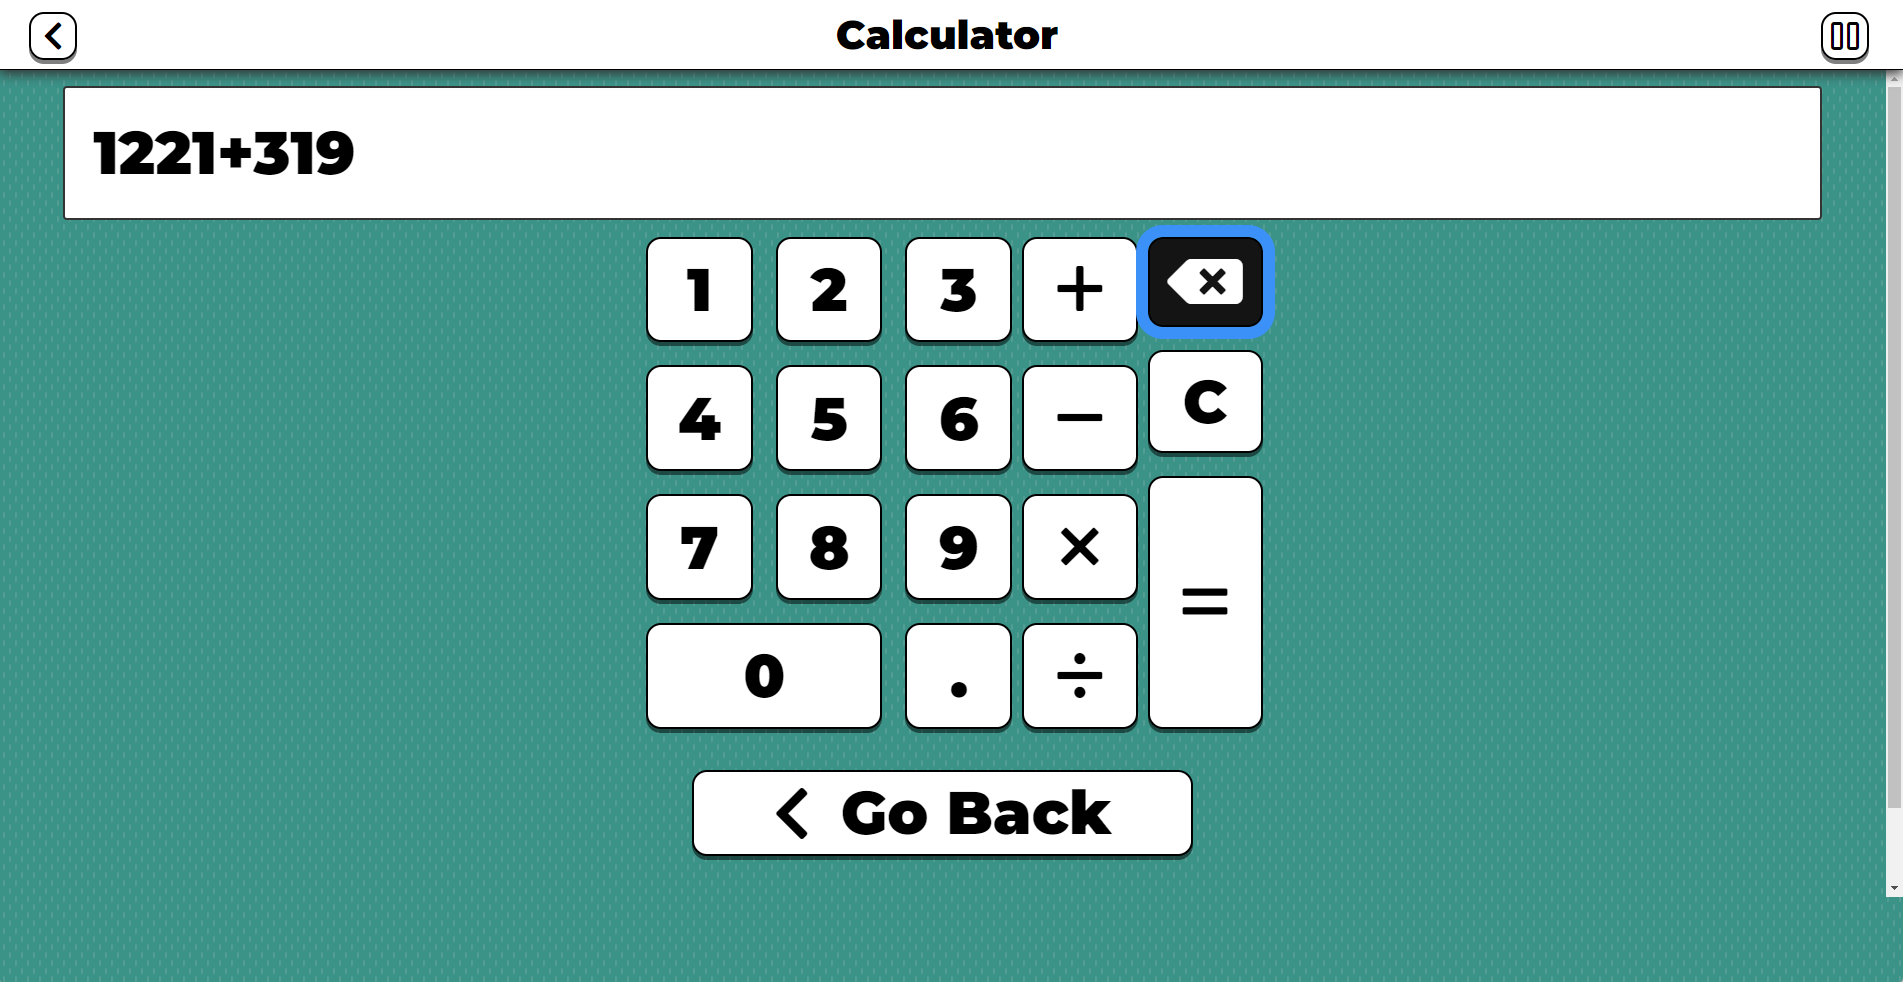 propack calculator with light colors